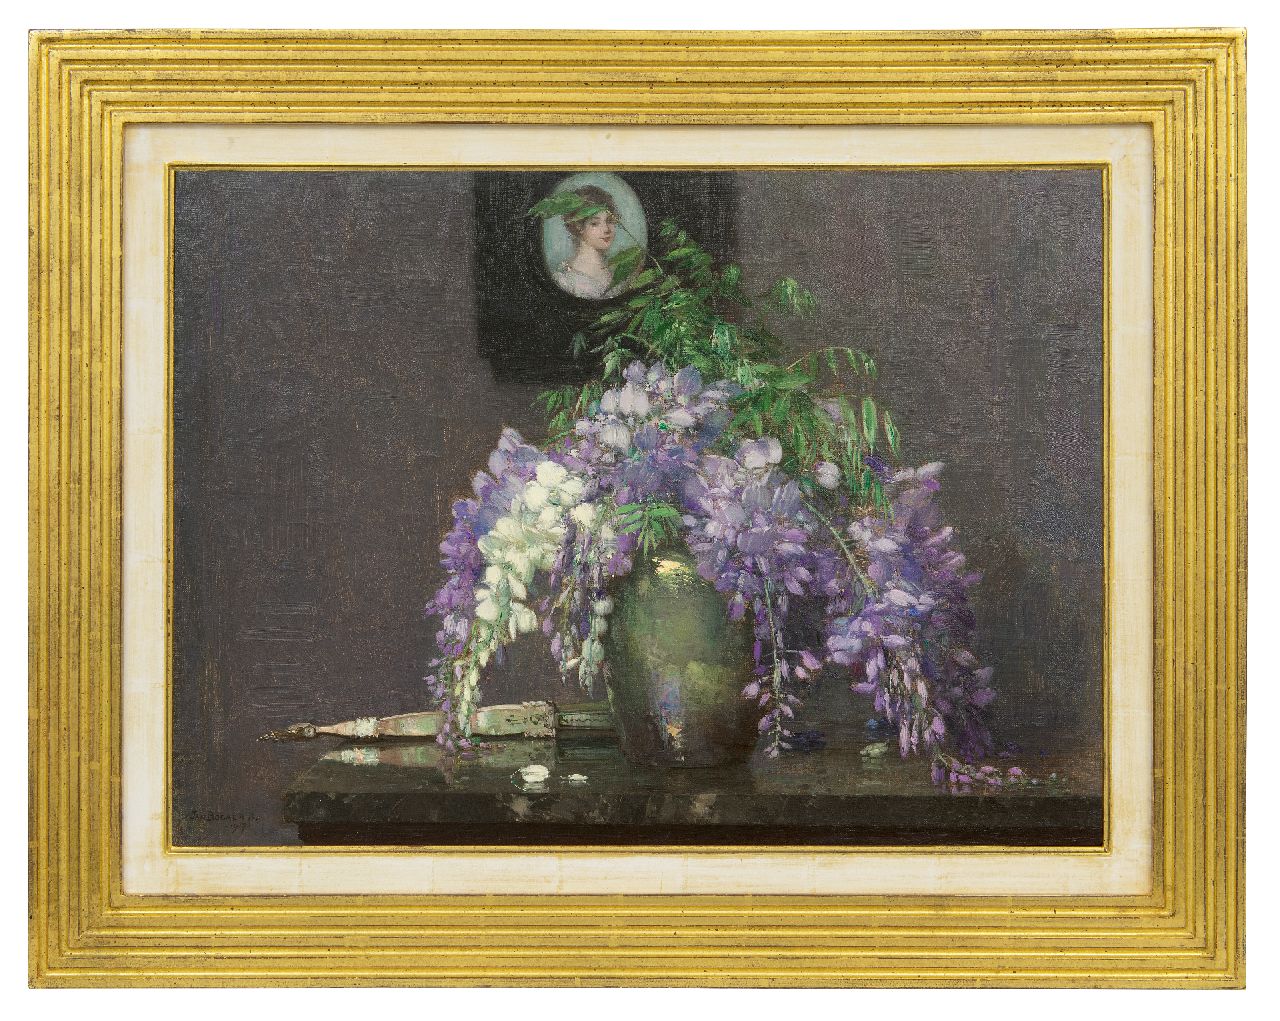 Bogaerts J.J.M.  | Johannes Jacobus Maria 'Jan' Bogaerts | Paintings offered for sale | A still life with Wisteria and a miniature portrait, oil on canvas 40.3 x 55.1 cm, signed l.l. and dated 1917